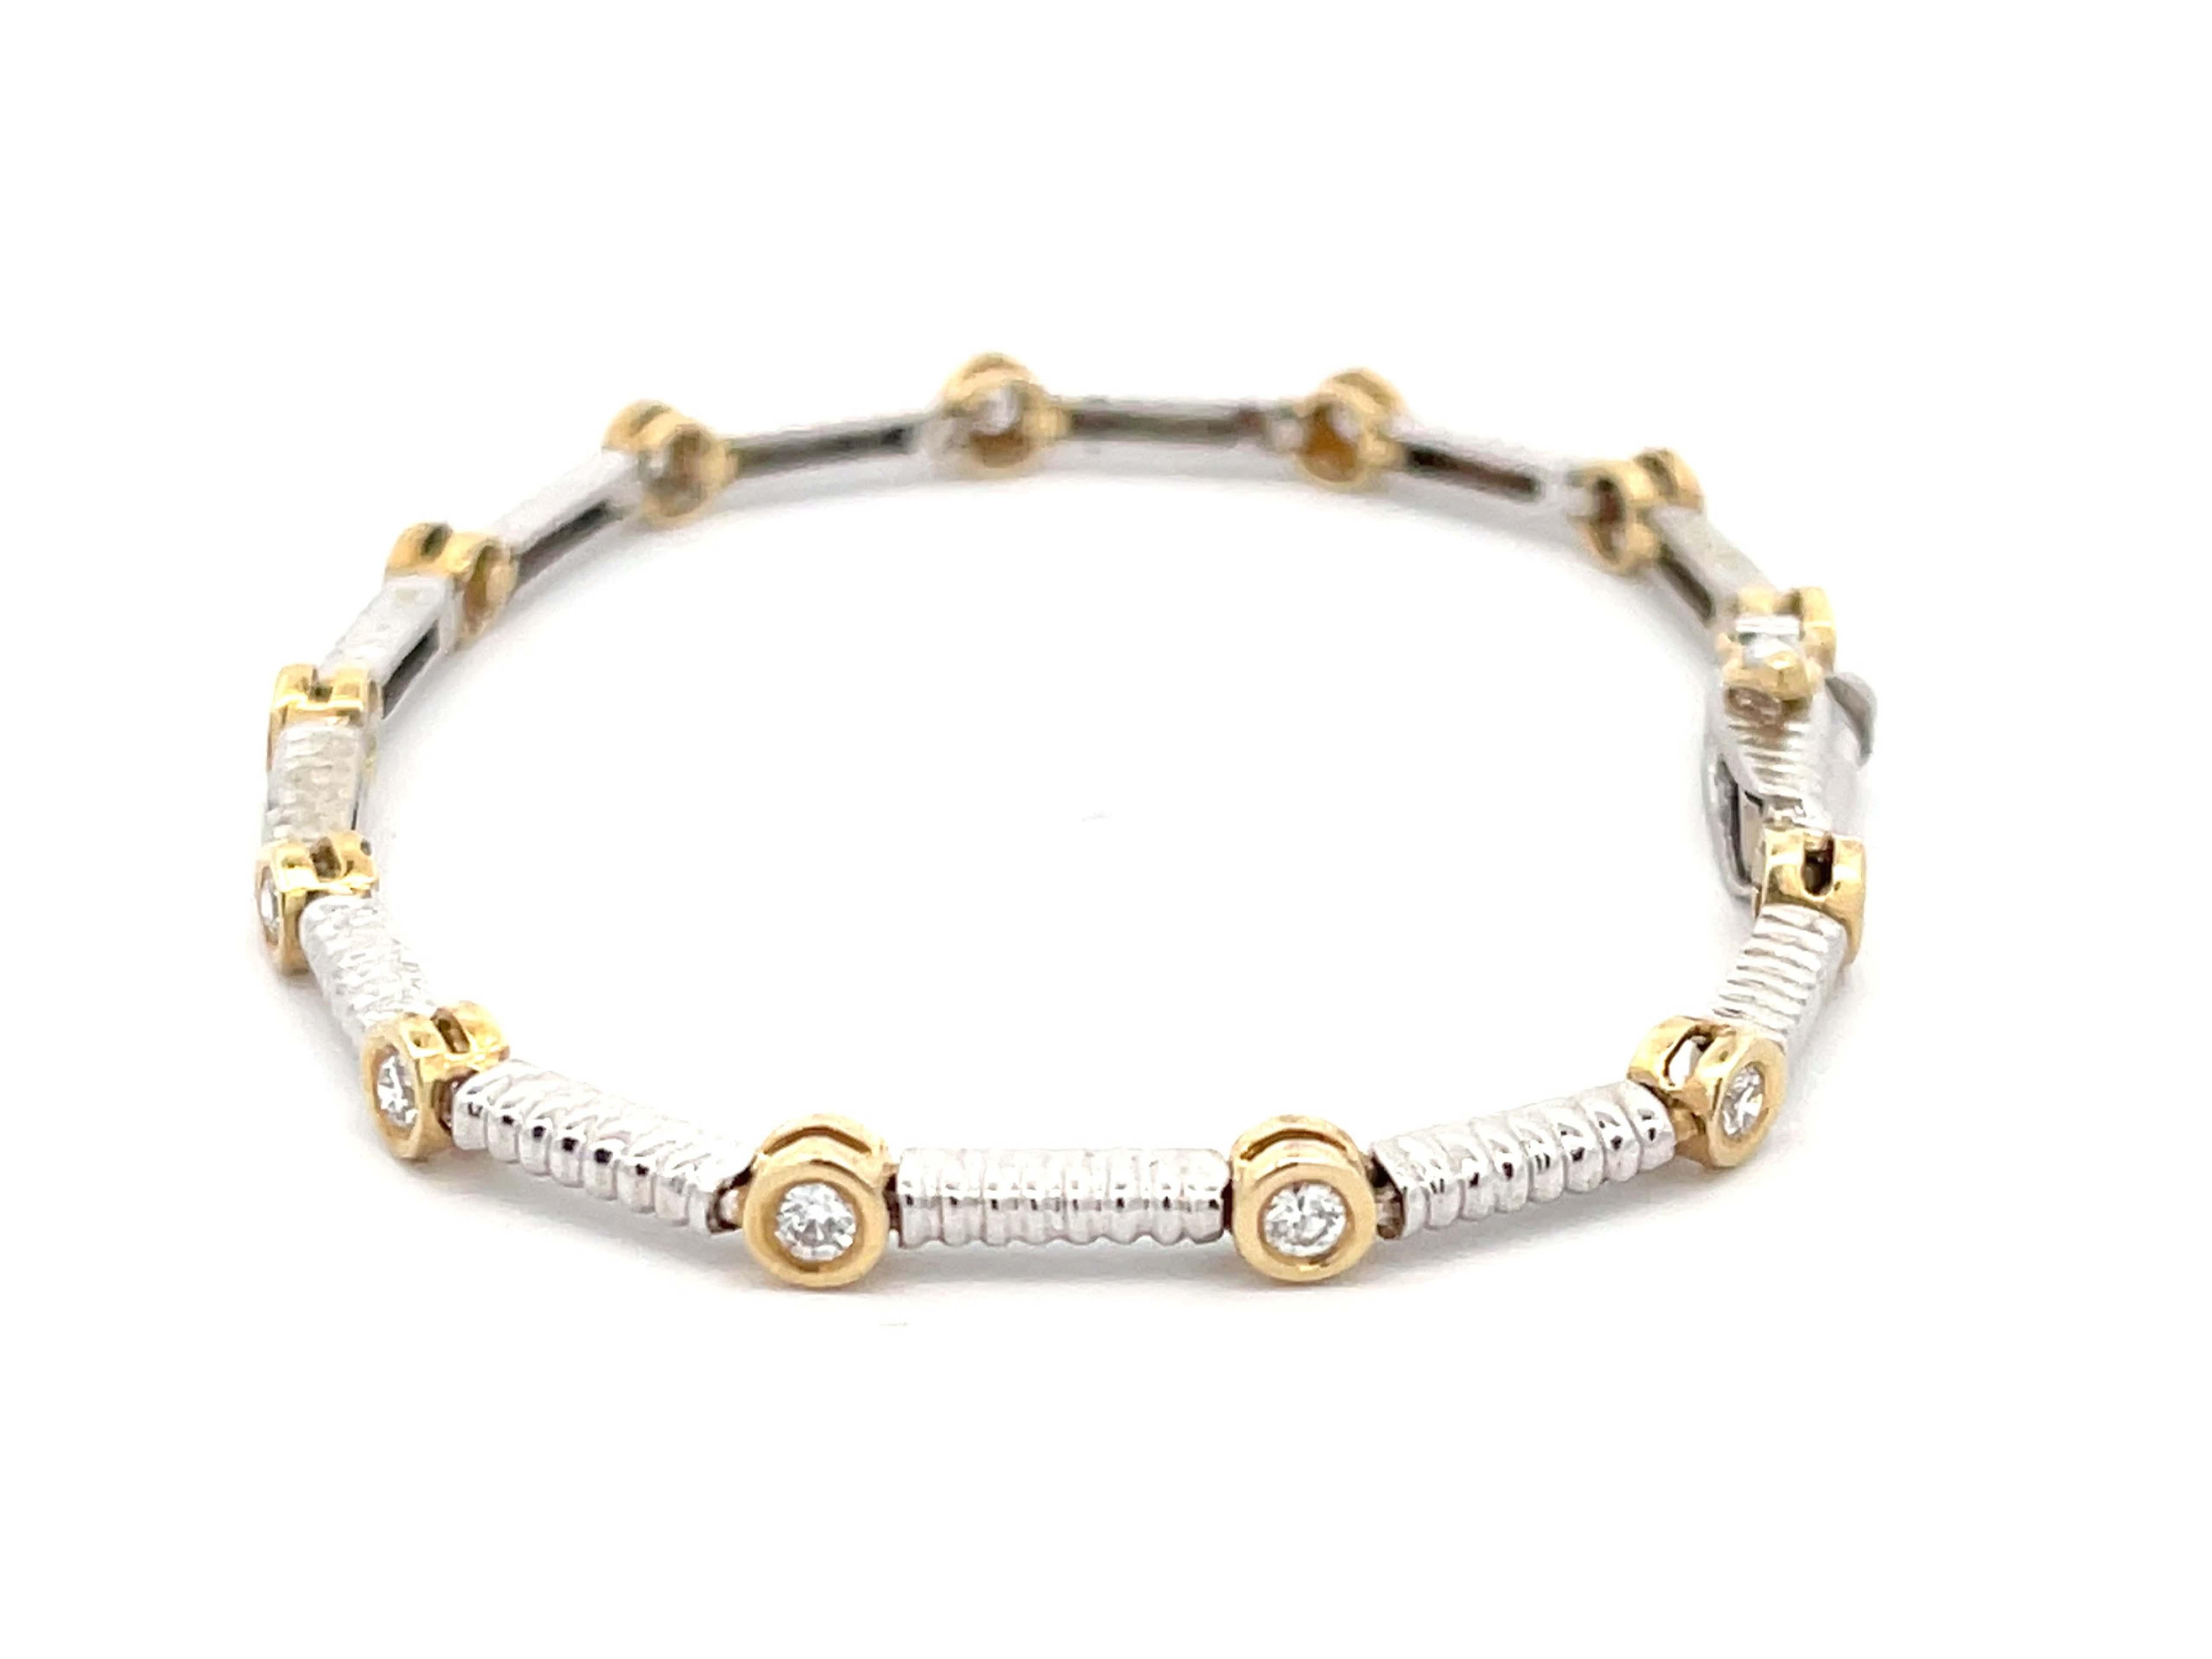 Two Toned Diamond Bracelet in 14k Gold In Excellent Condition For Sale In Honolulu, HI